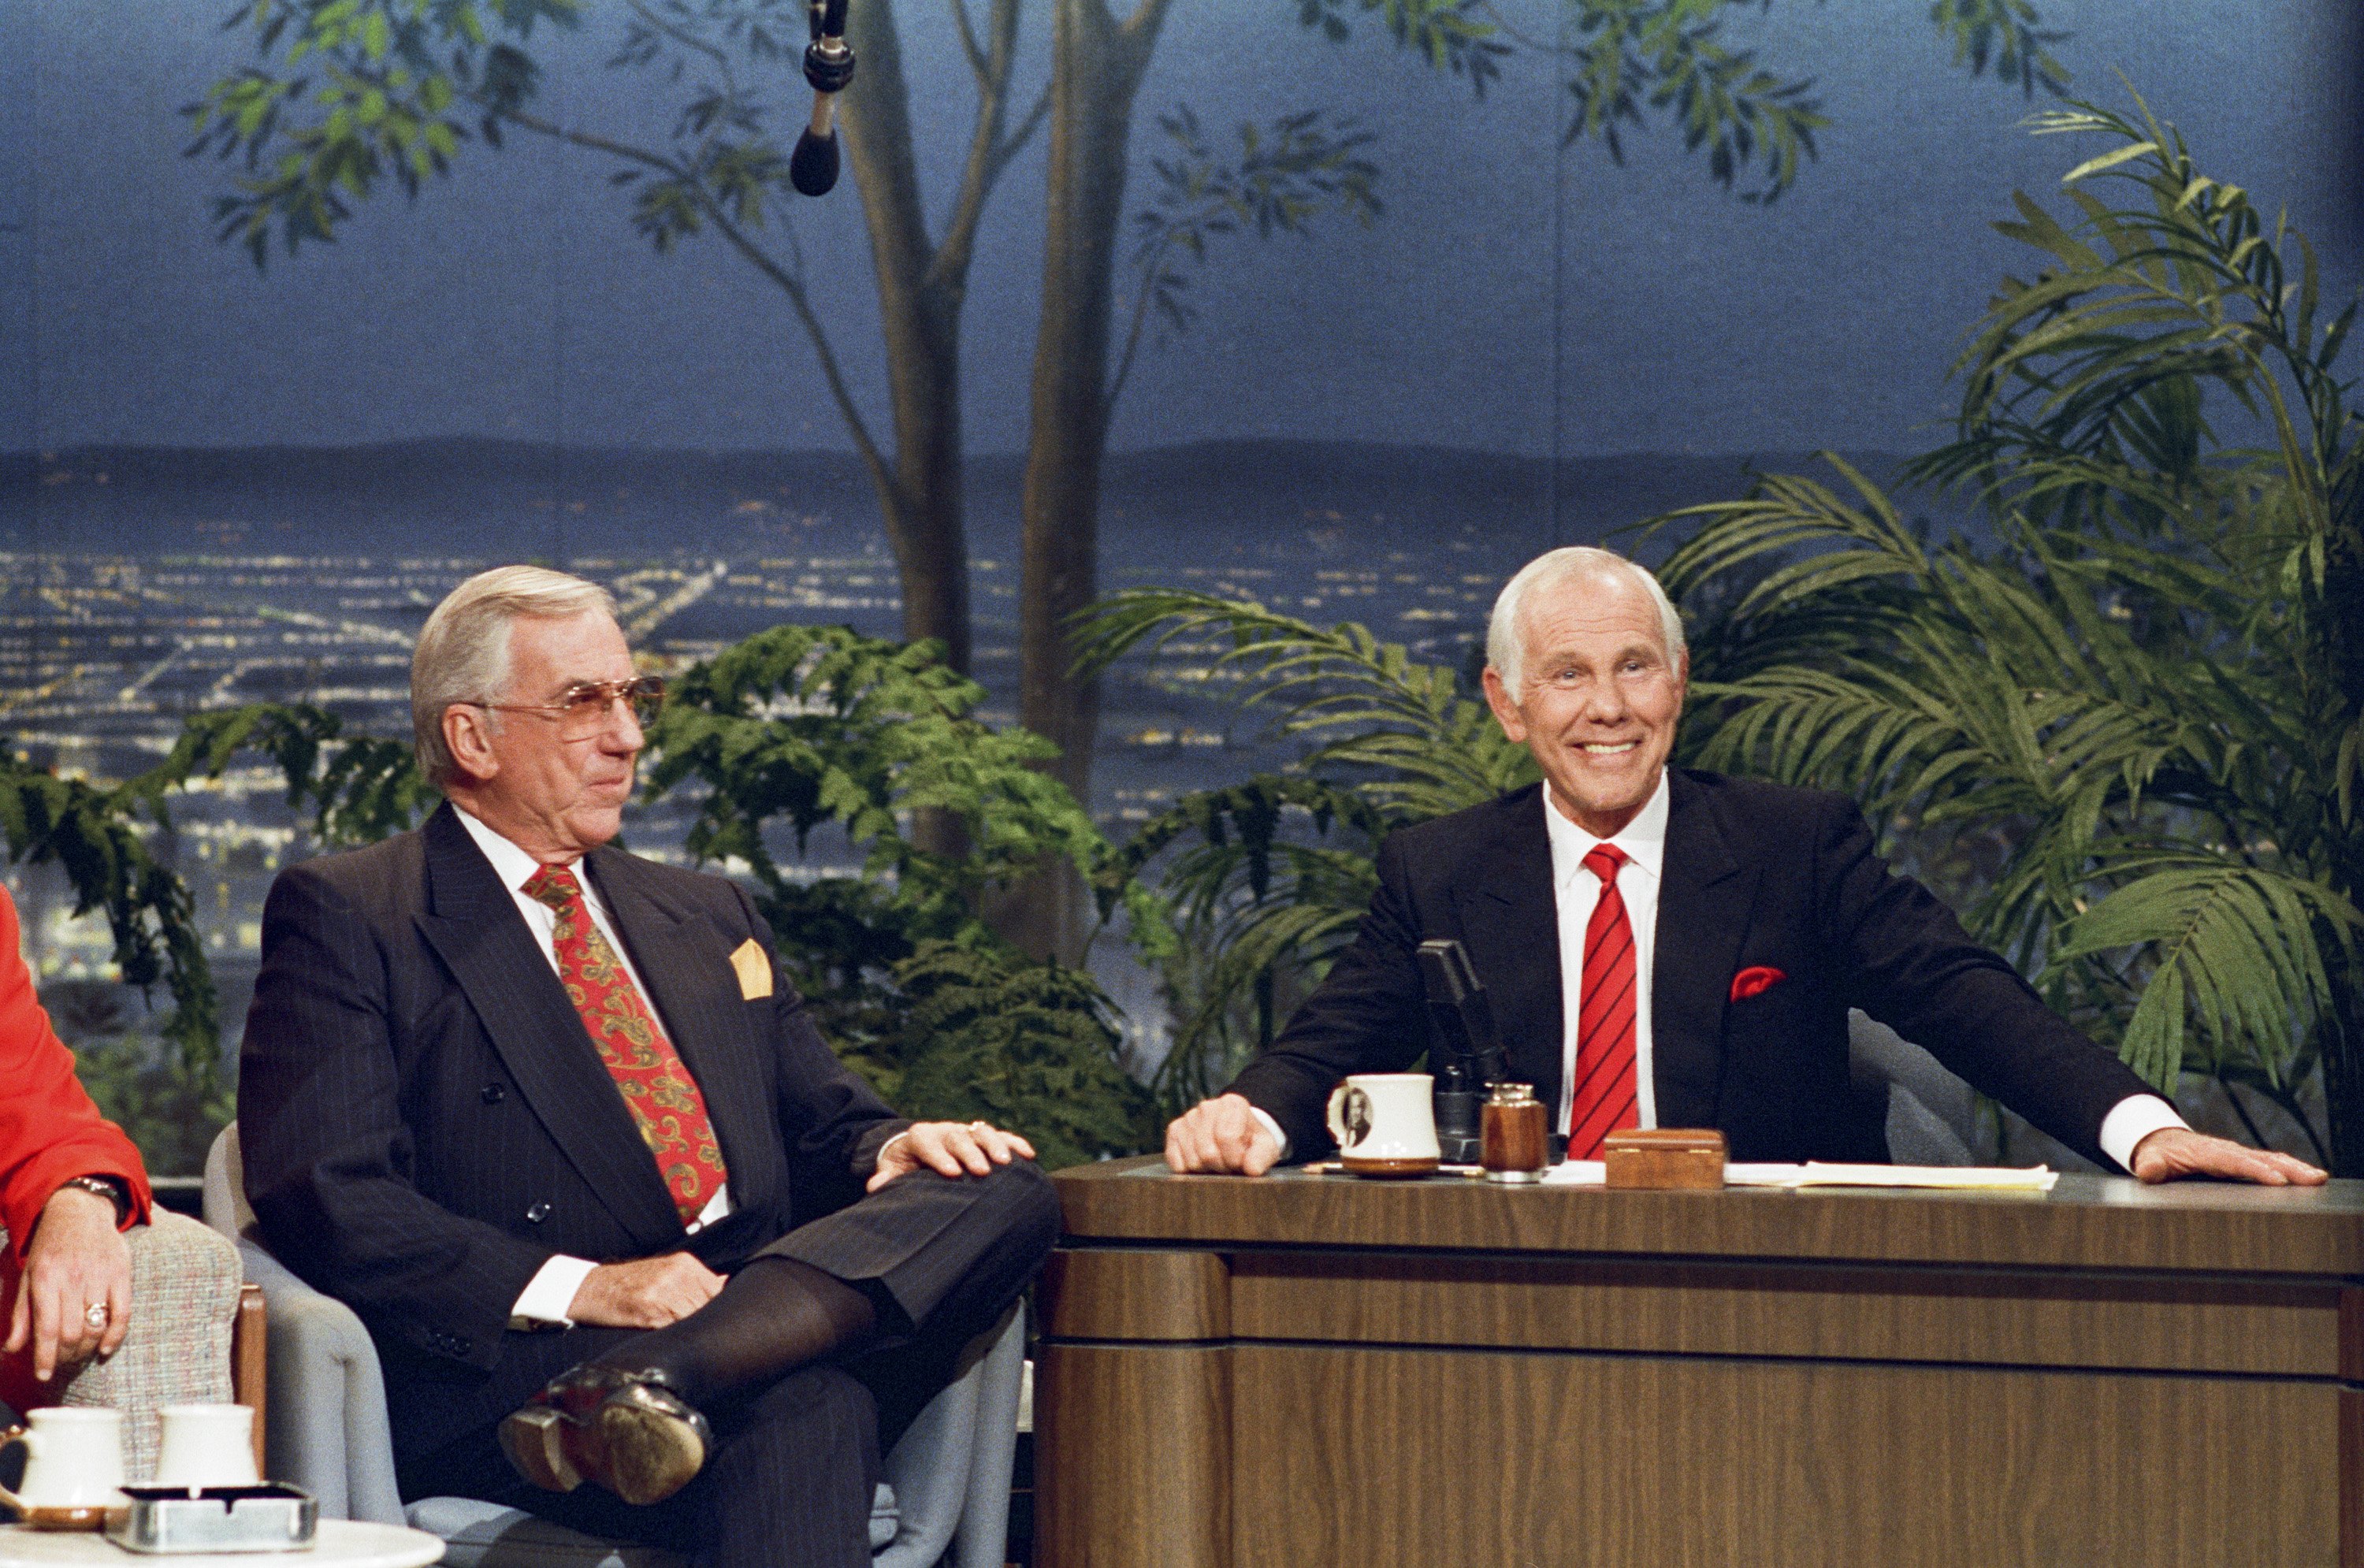 Johnny Carson and co-host Ed McMahon on "The Tonight Show Starring Johnny Carson" | Source: Getty Images